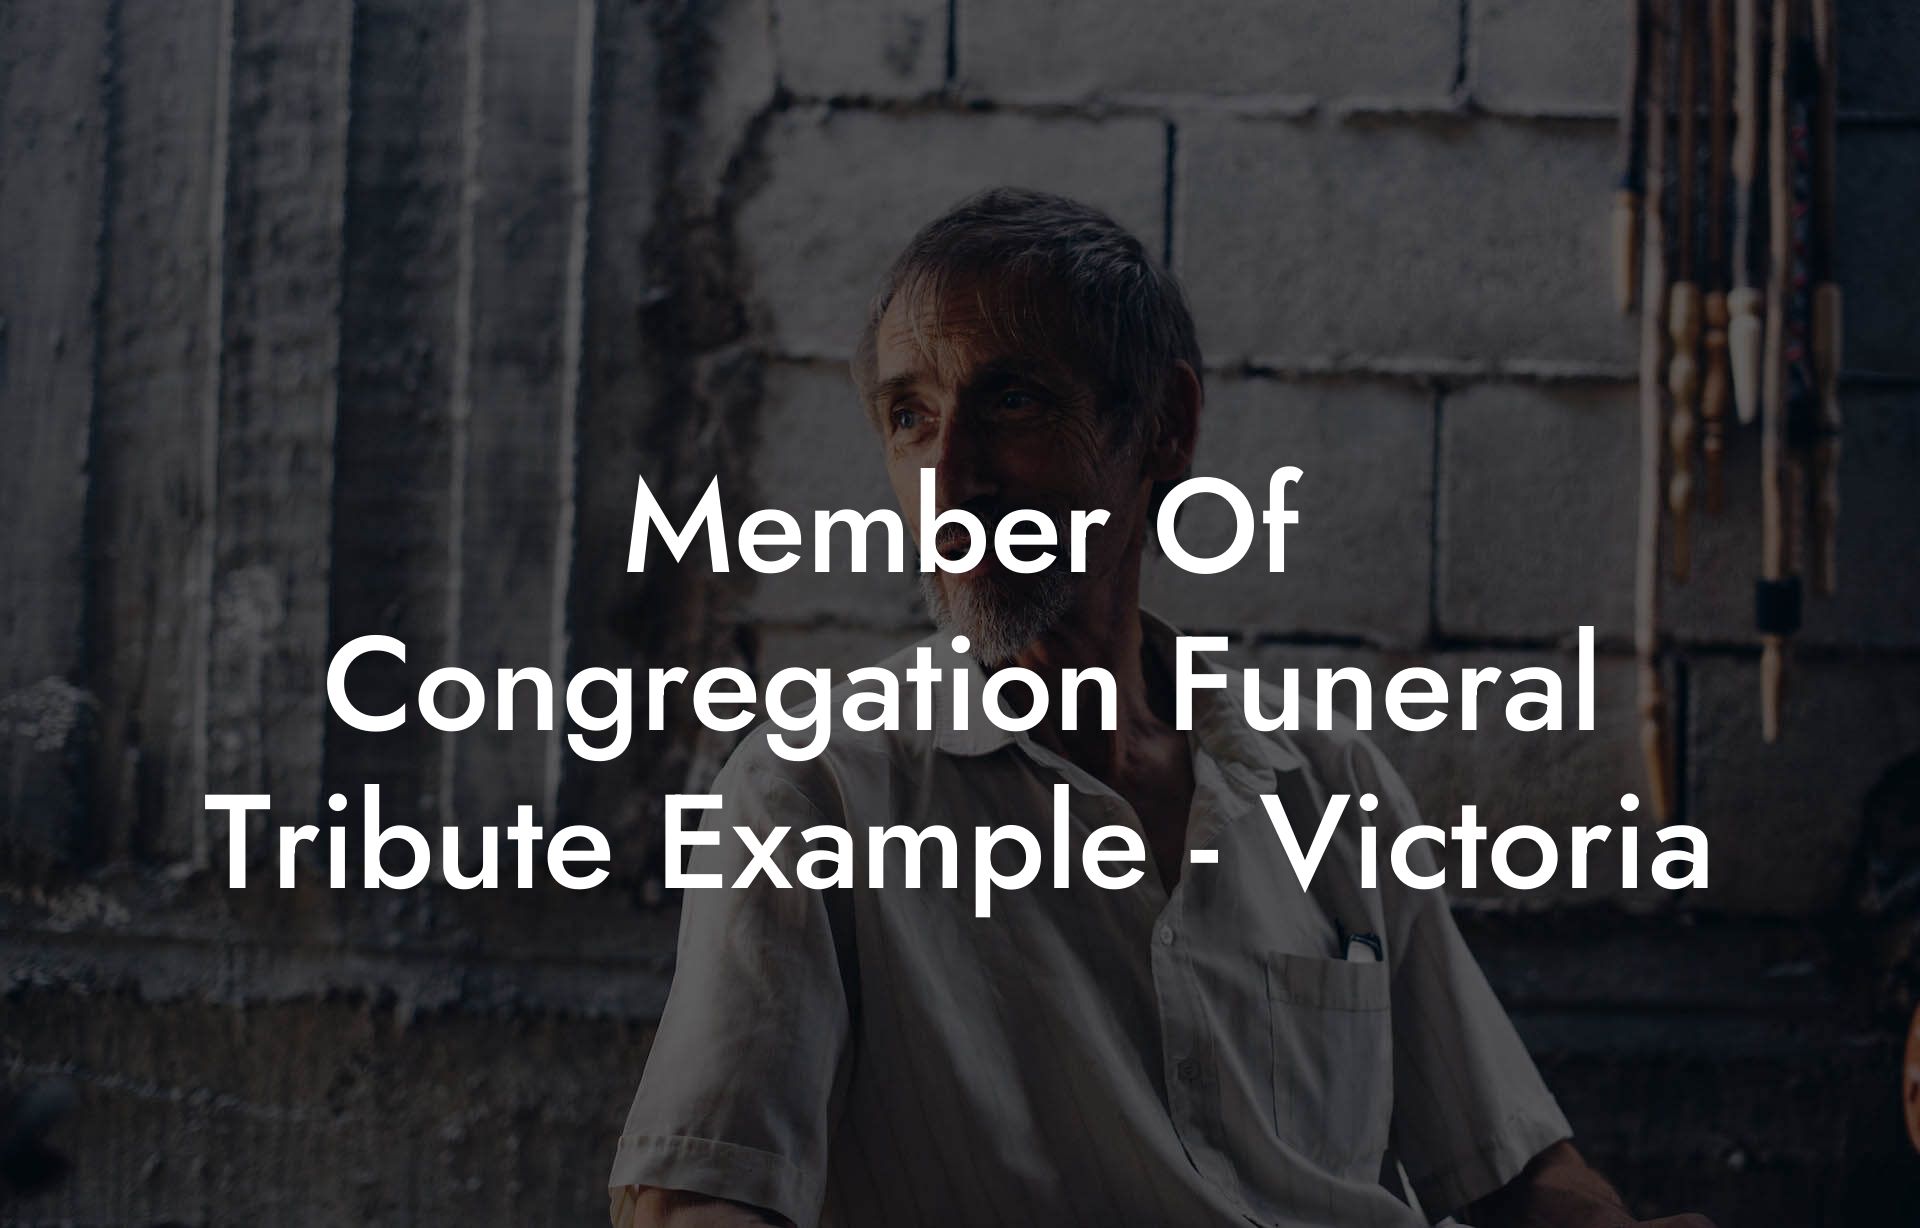 Member Of Congregation Funeral Tribute Example - Victoria